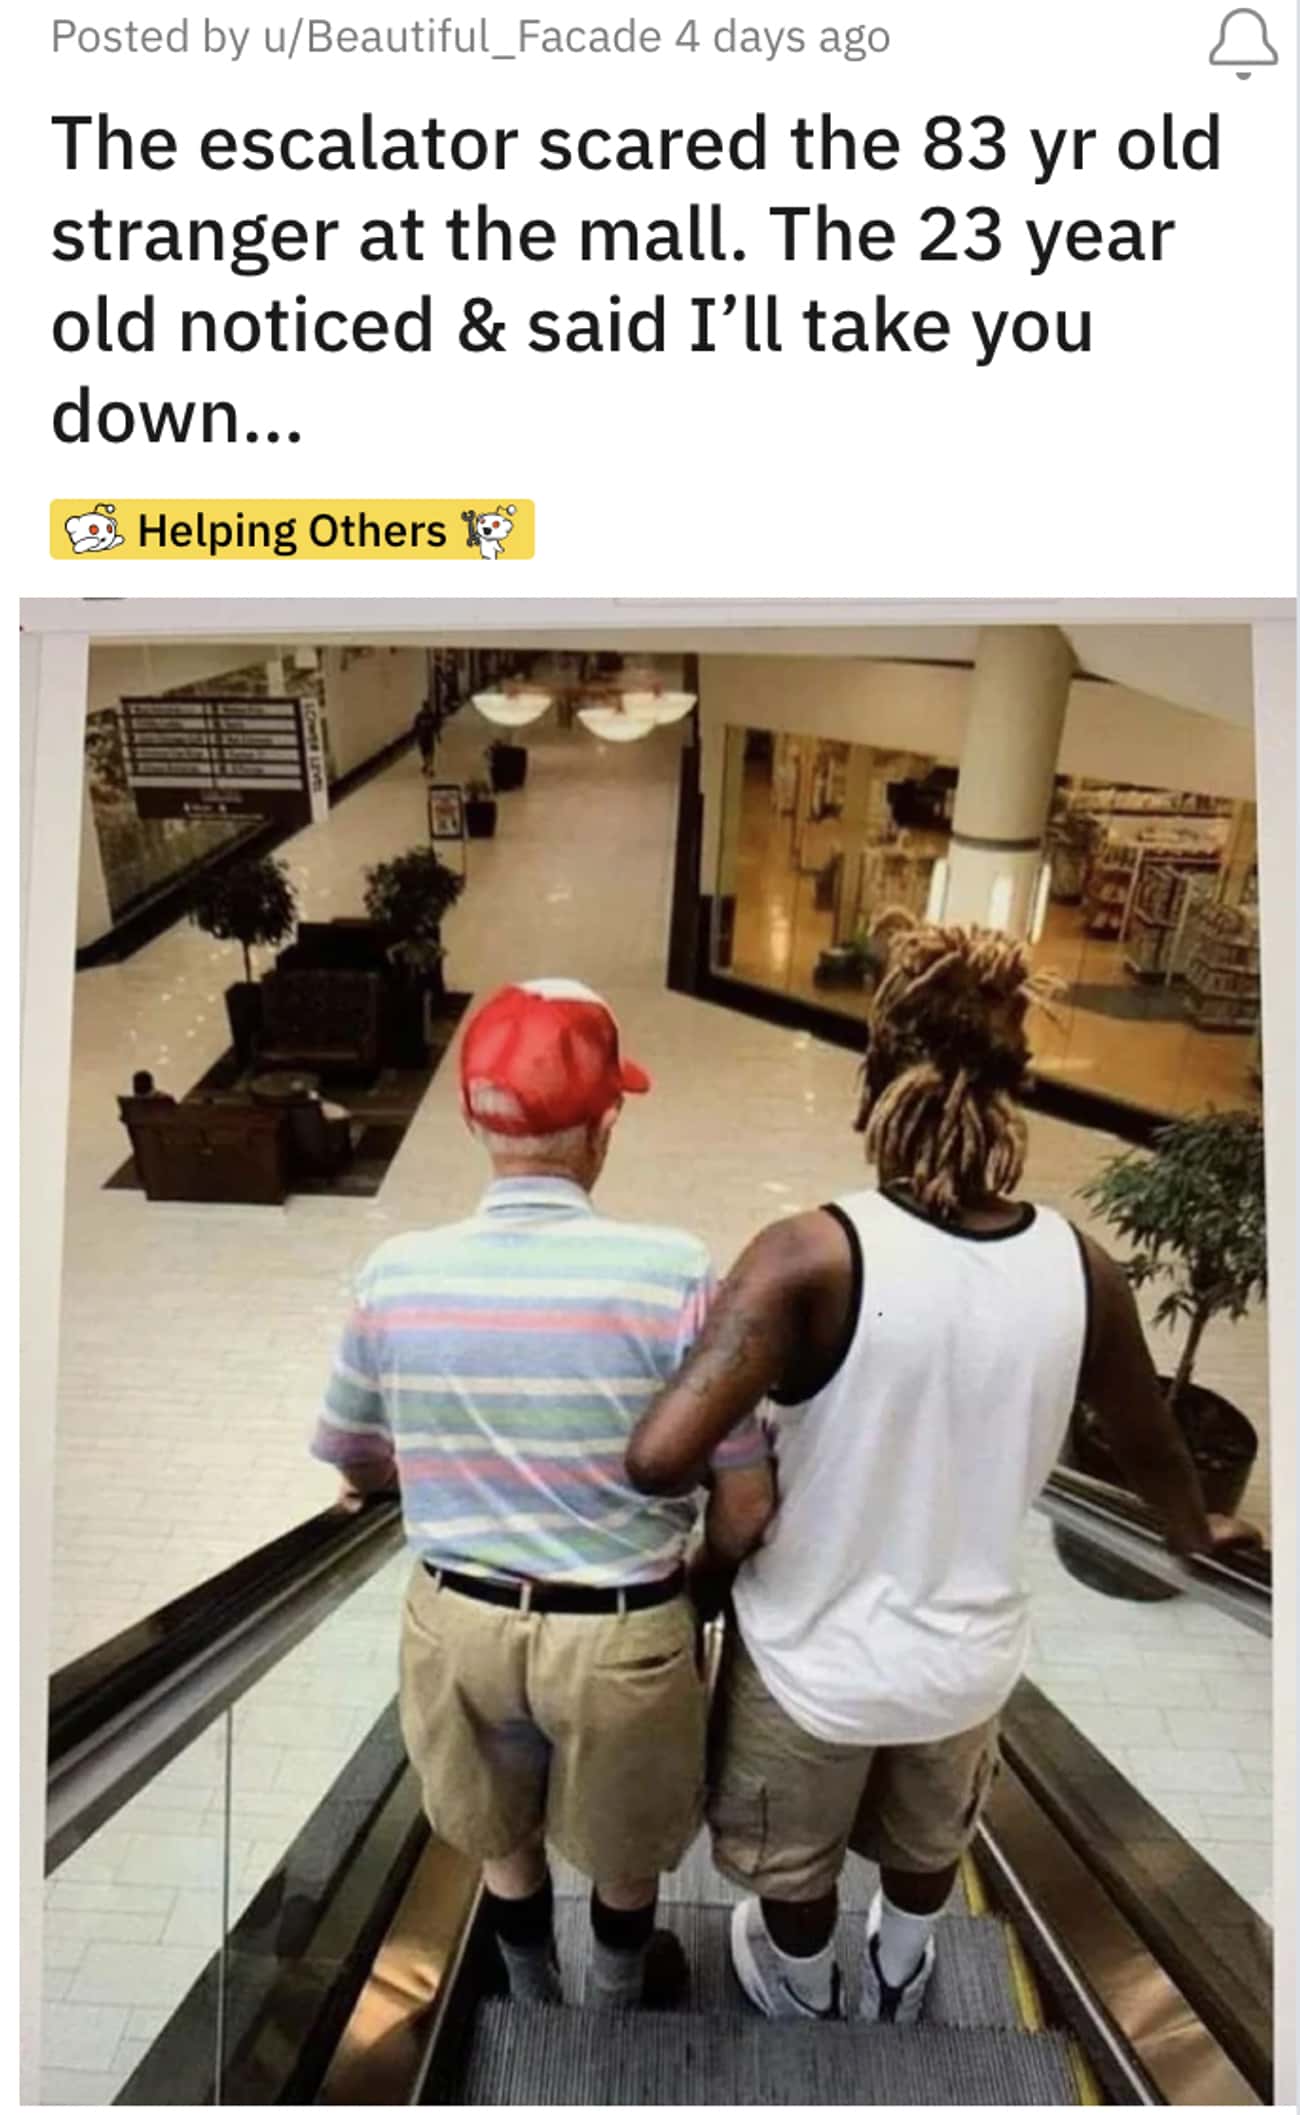 23 Year Old Helps 83 Year Old Down Escalator